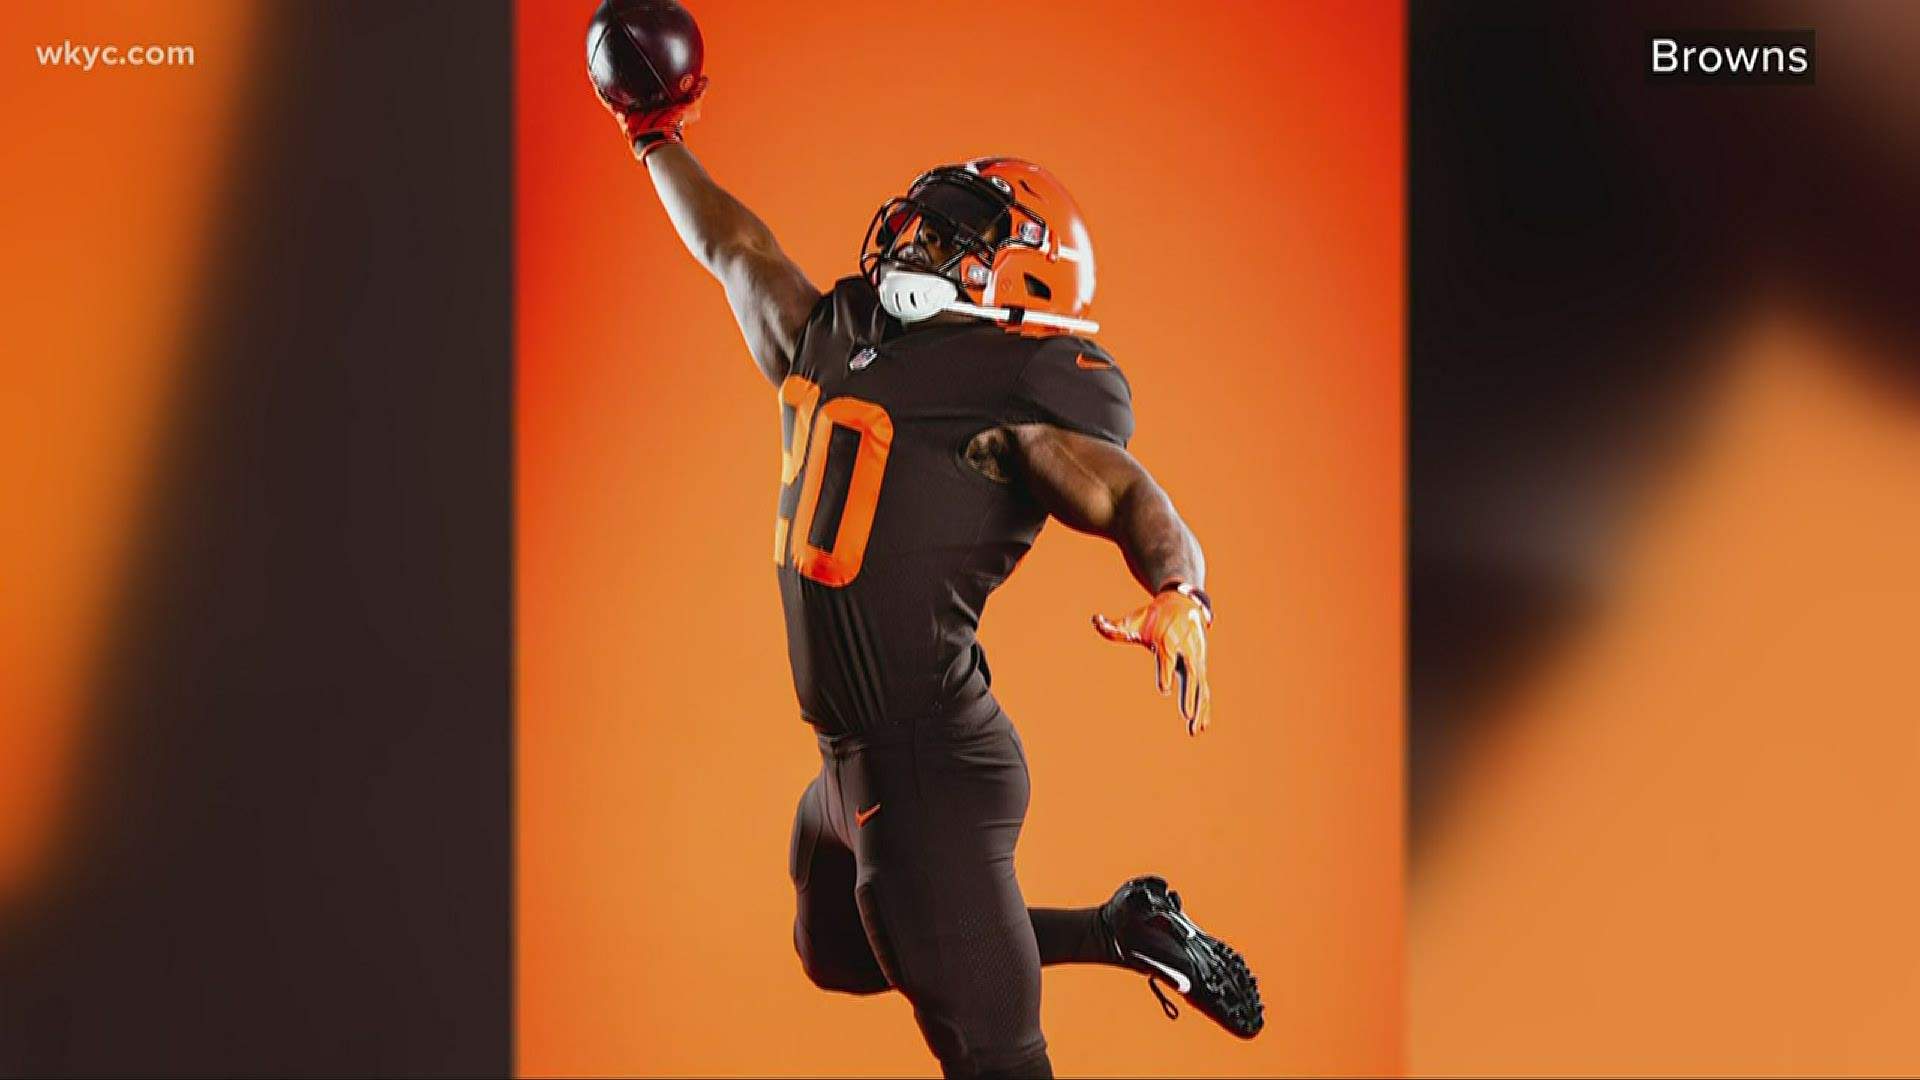 The Browns has some new digs.  It's a throwback to the Glory Days, what do you think of the new look?